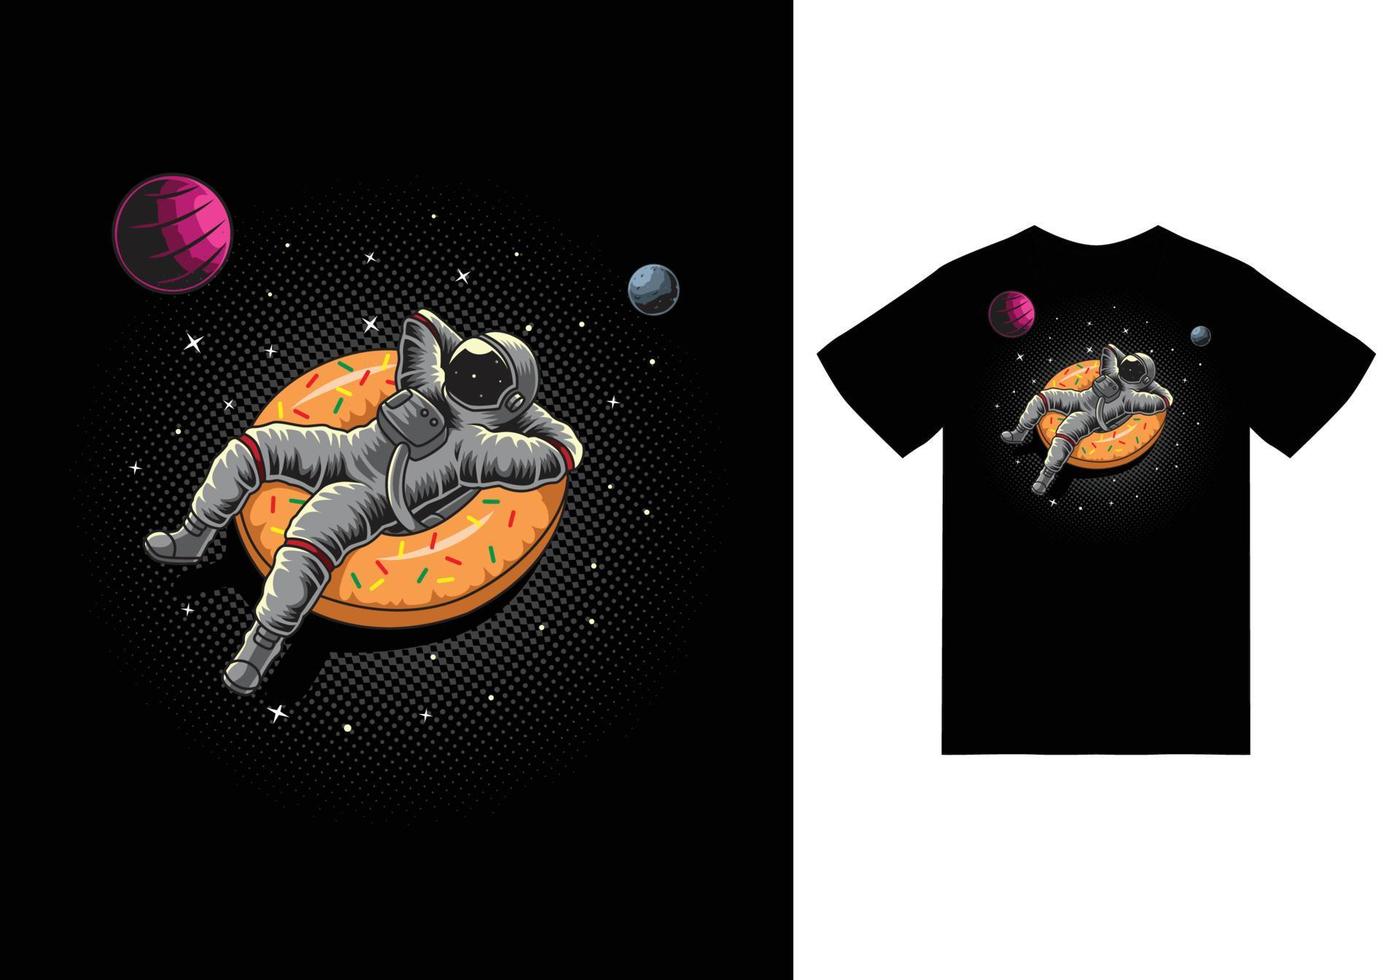 Astronaut floating on space donut balloon illustration with tshirt design premium vector